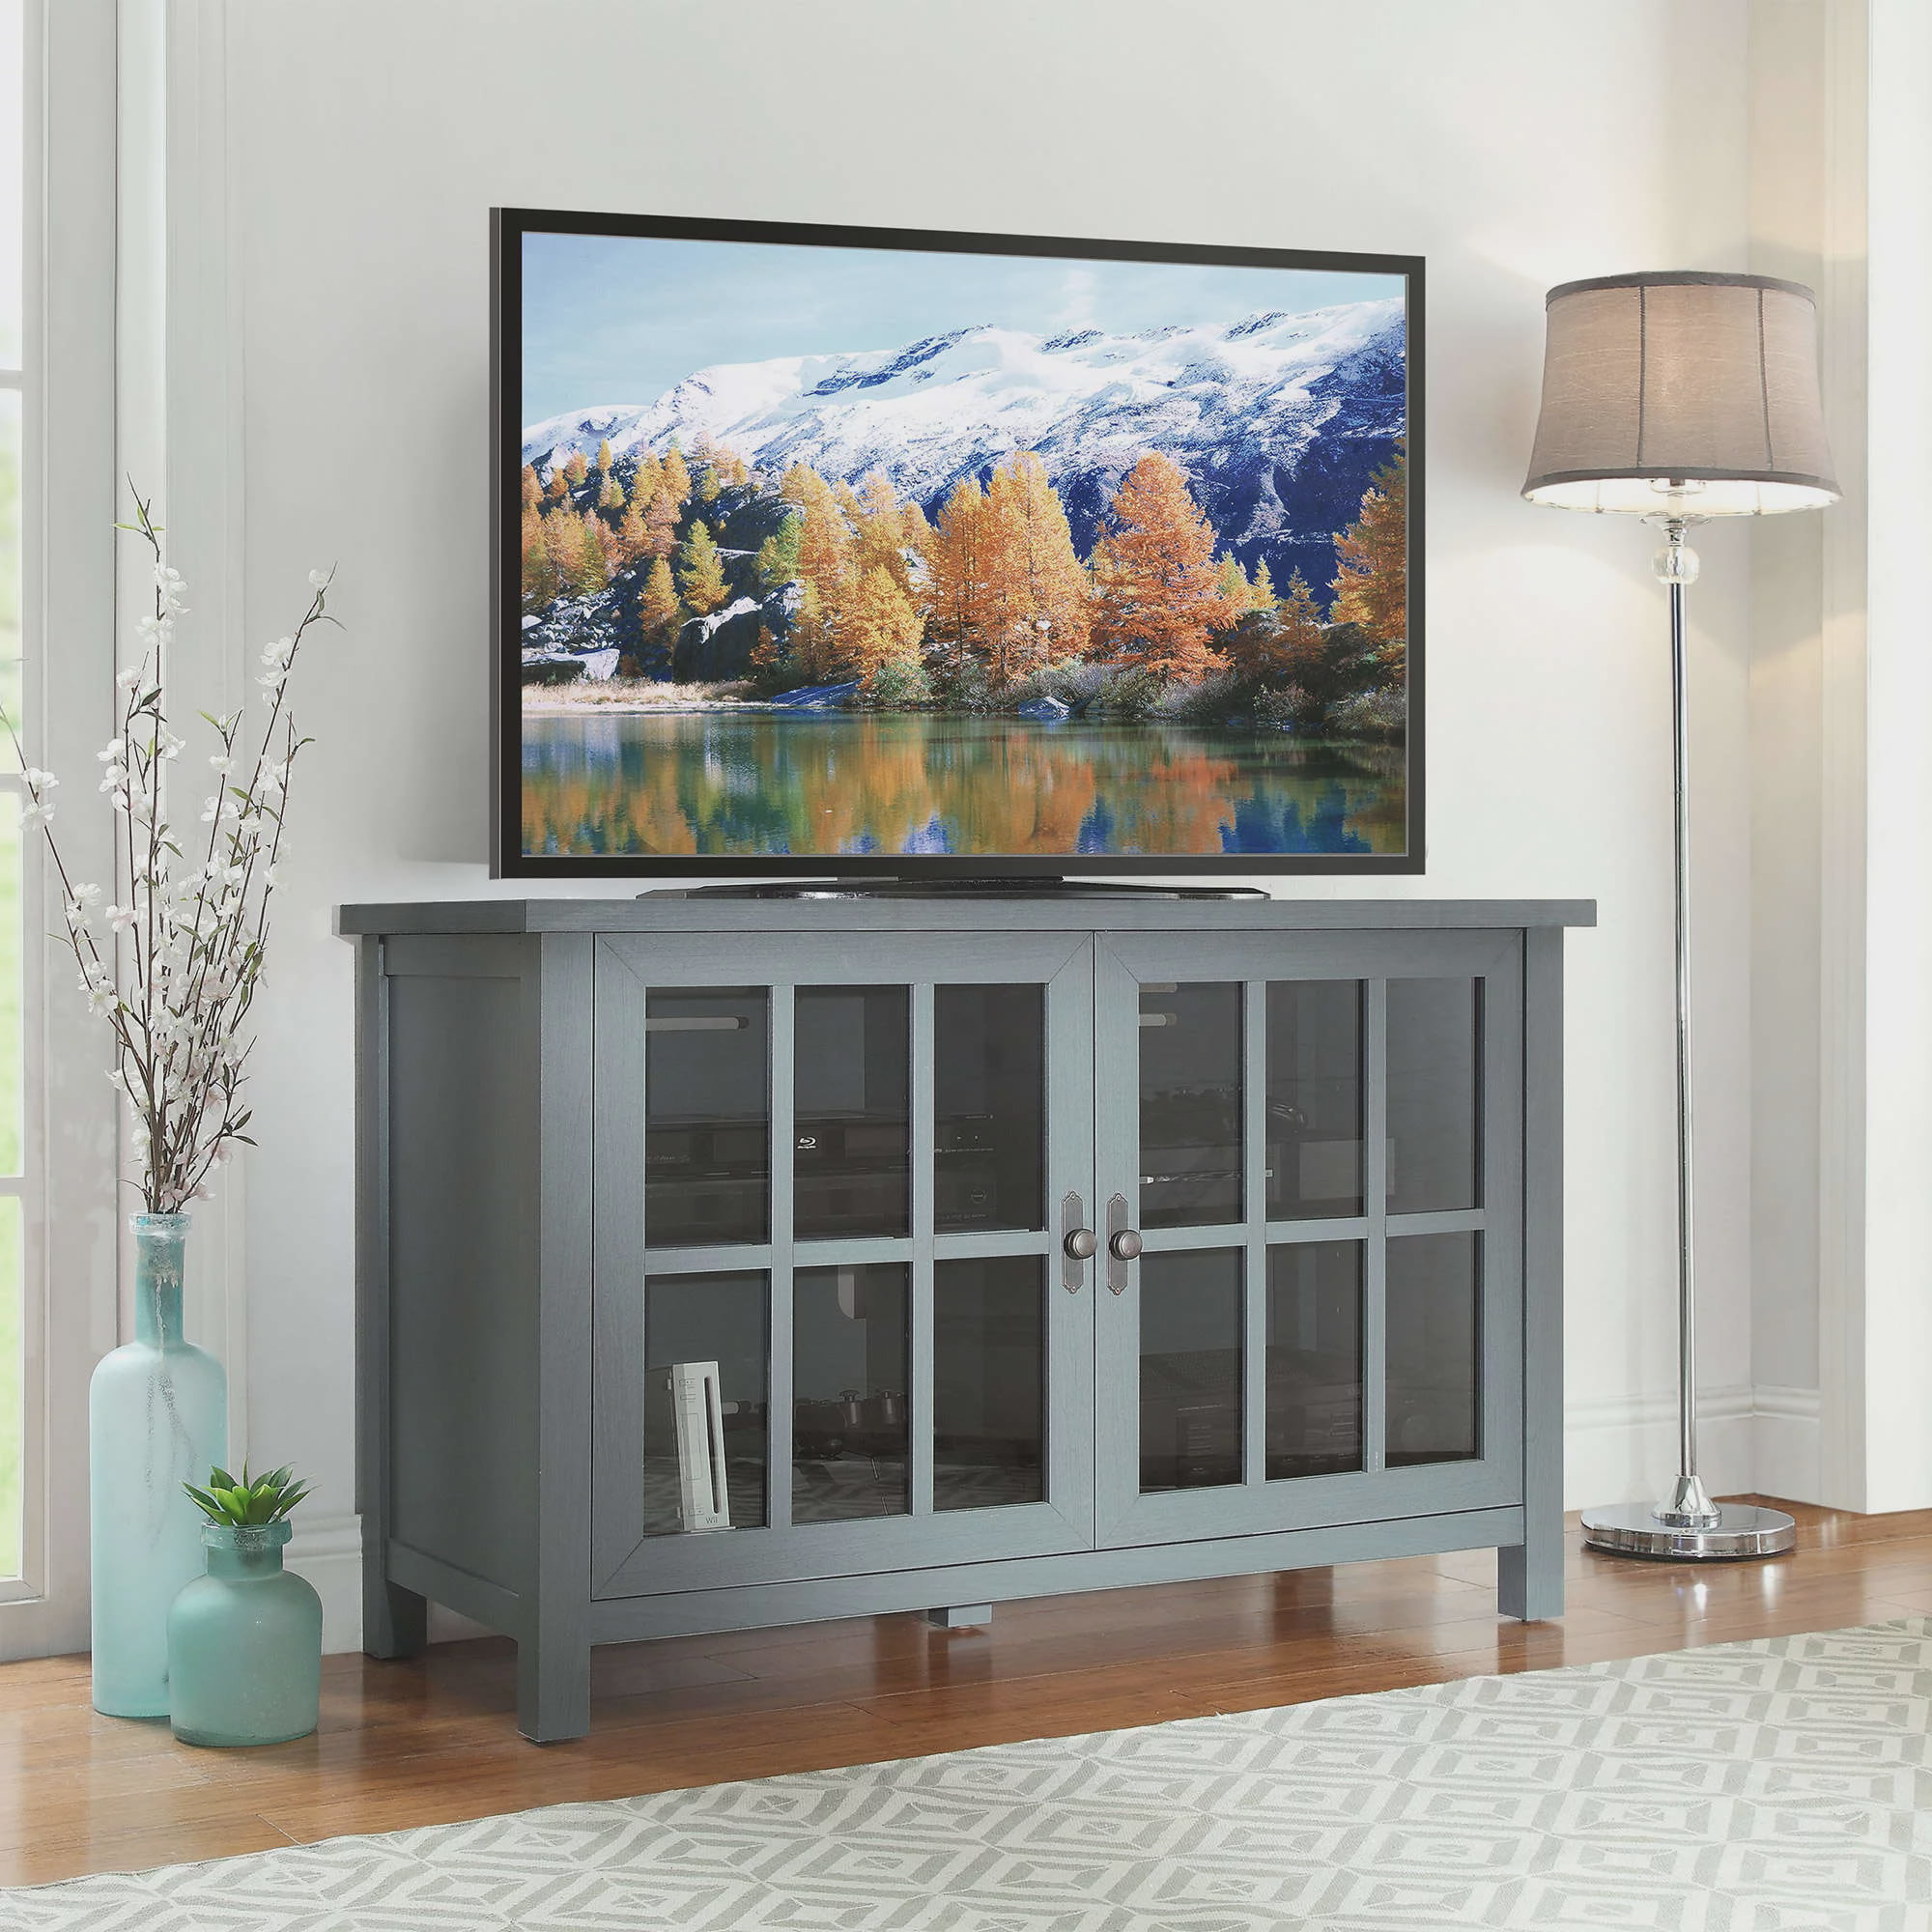 Better Homes & Gardens Oxford Square TV Stand for TV's Up to 55" (various) $126 + Free Shipping